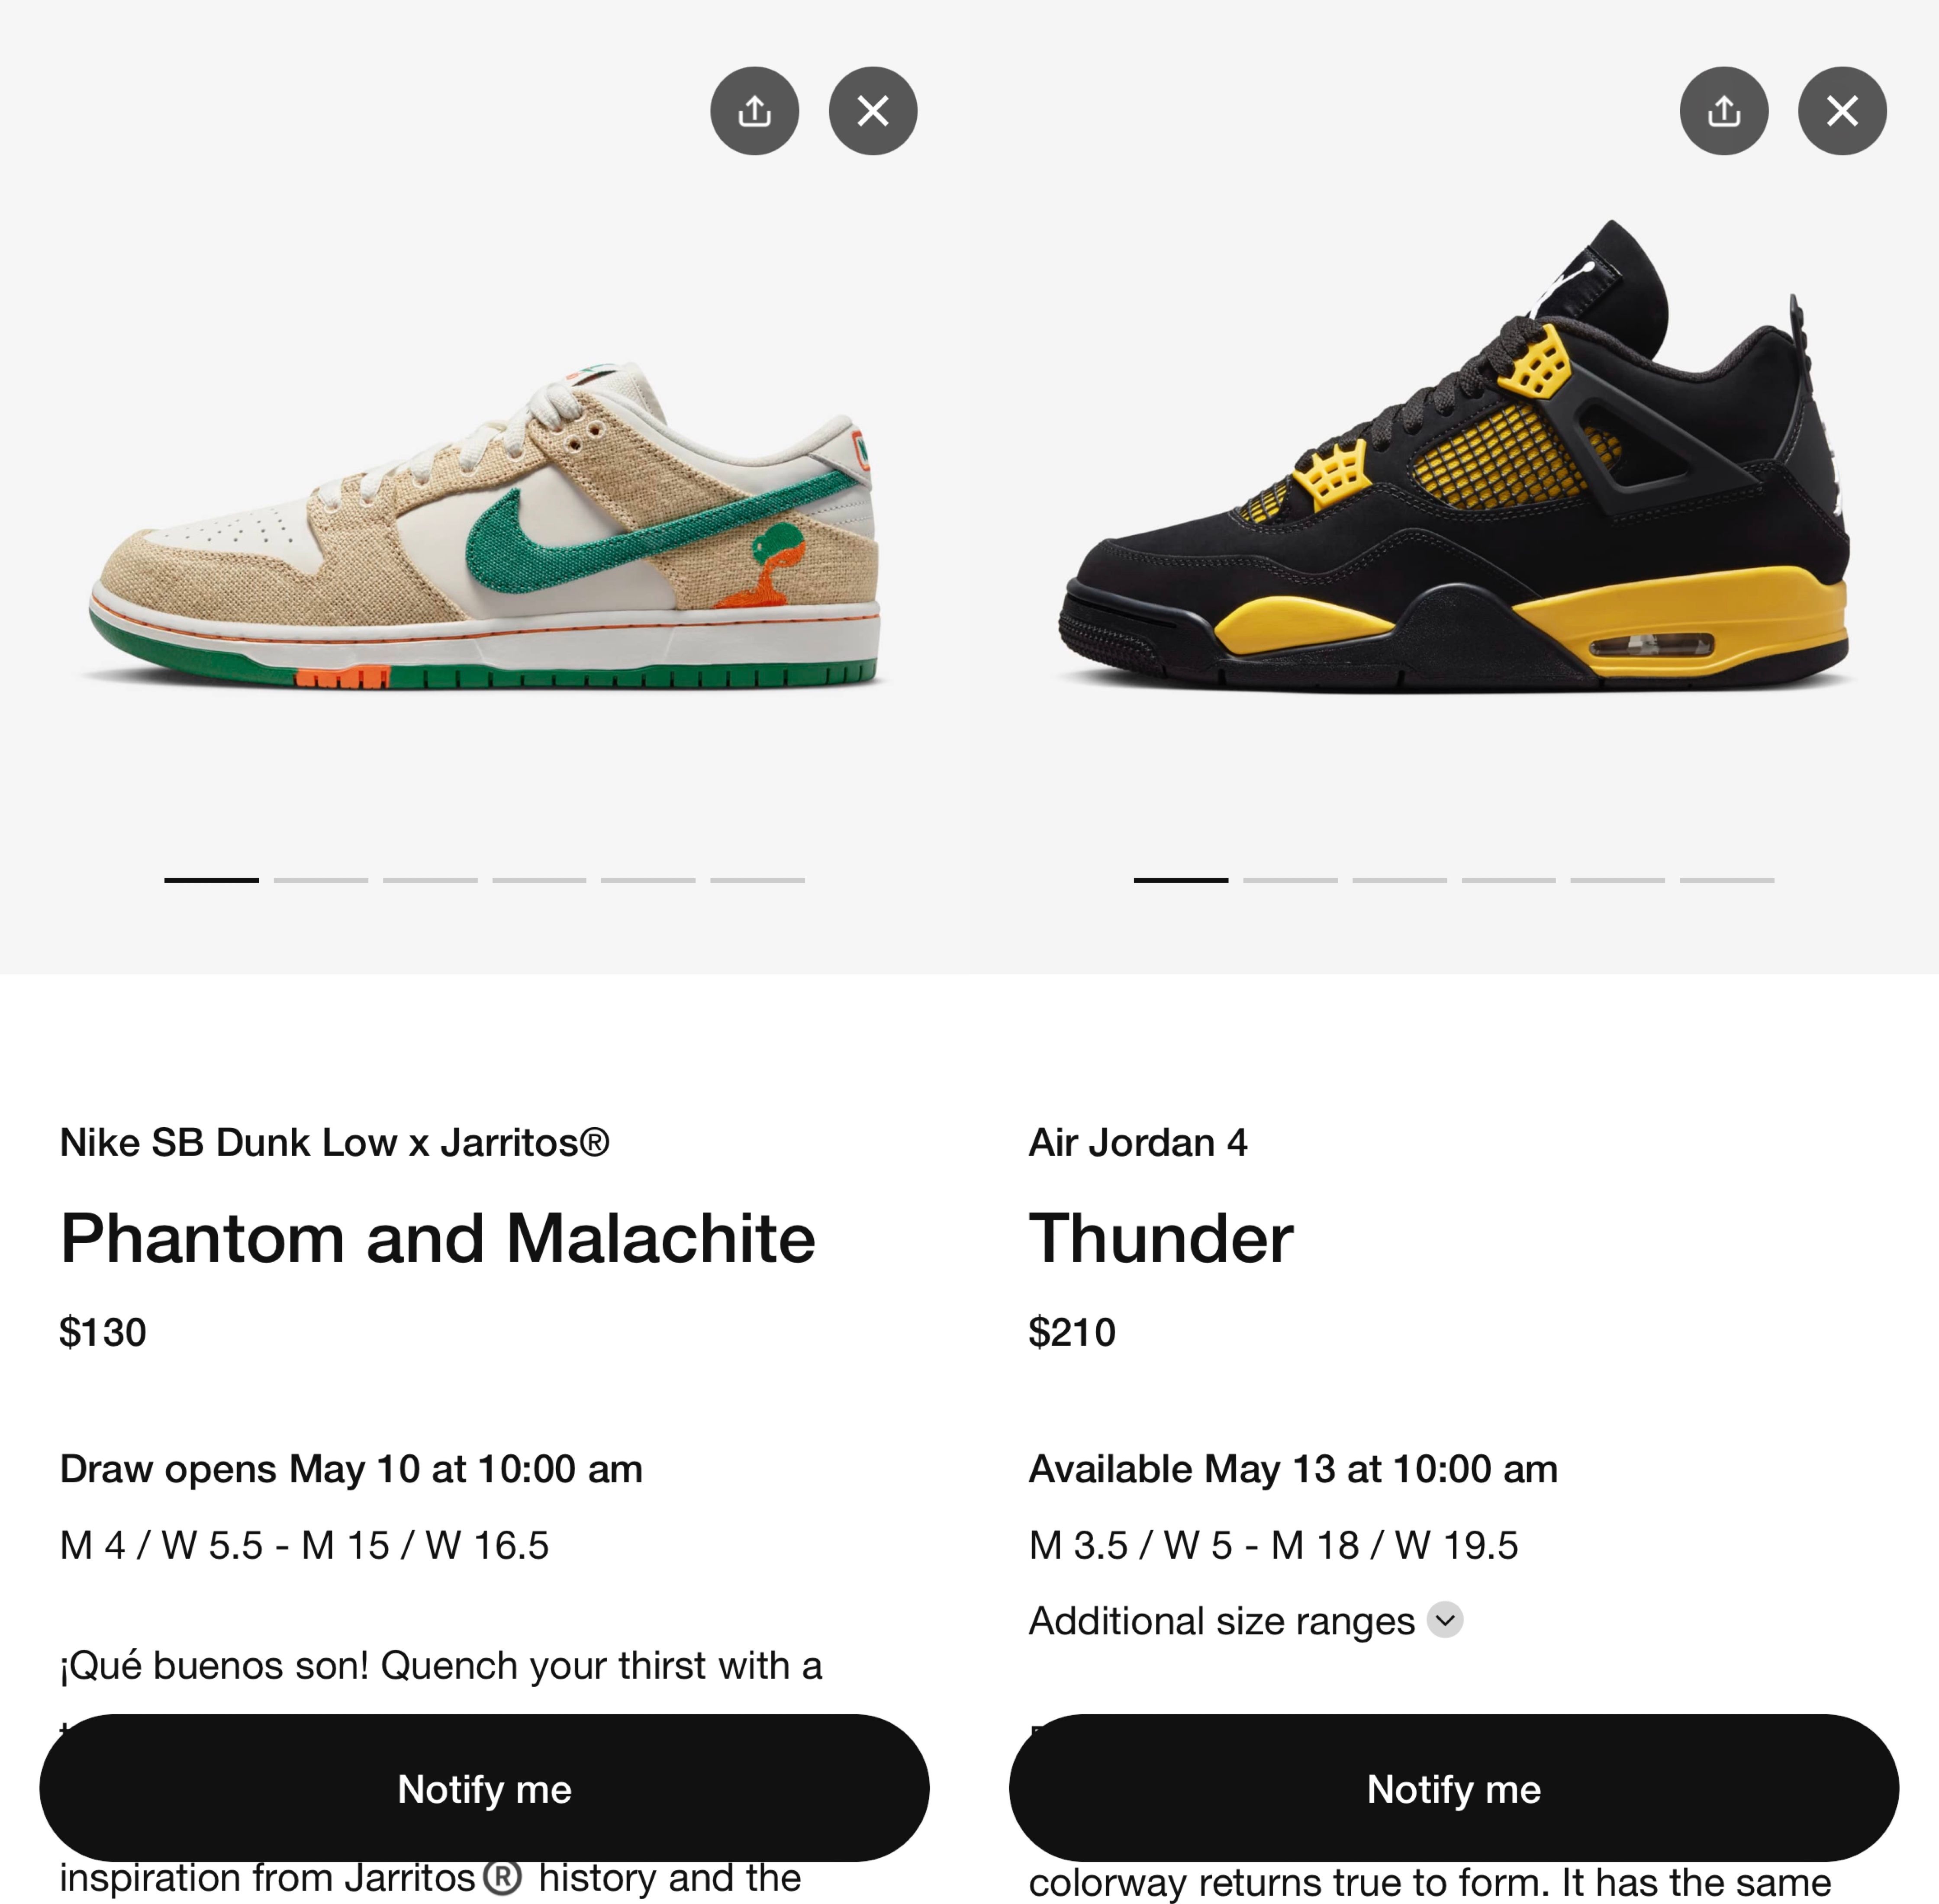 Got ‘Em! - Your Guide To Success On The SNKRS App - TheSiteSupply